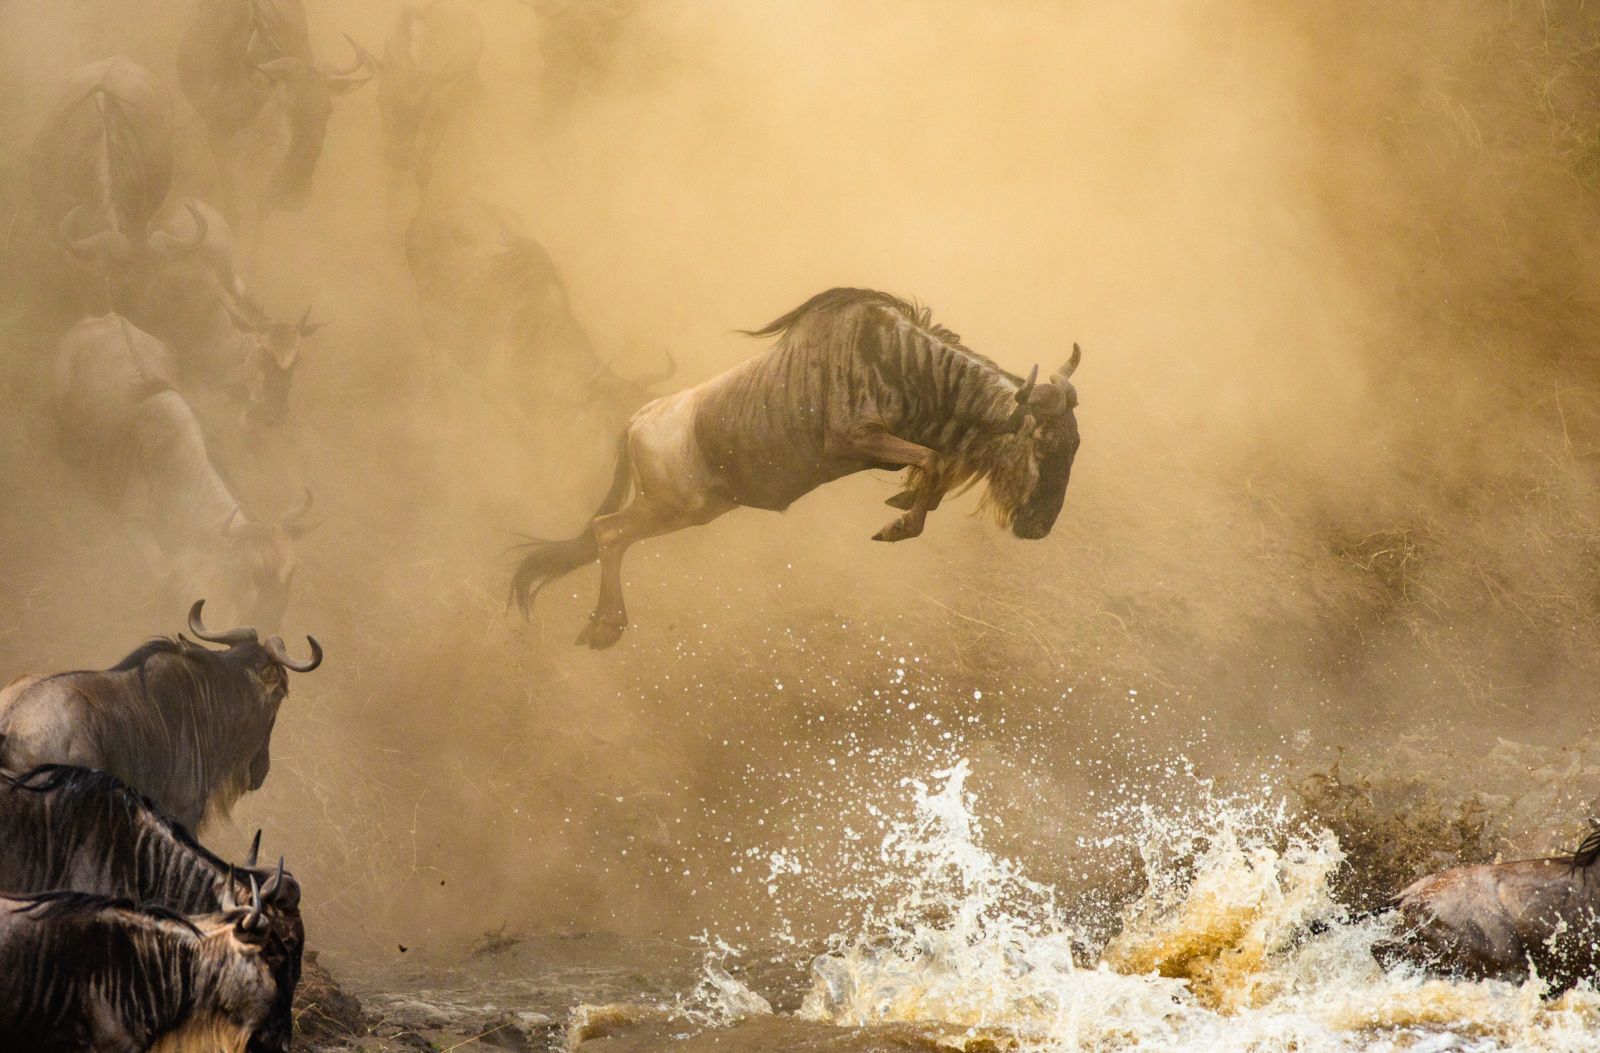 Action shot of a wildebeest leaping from a river bank on the Great Migration in Tanzania